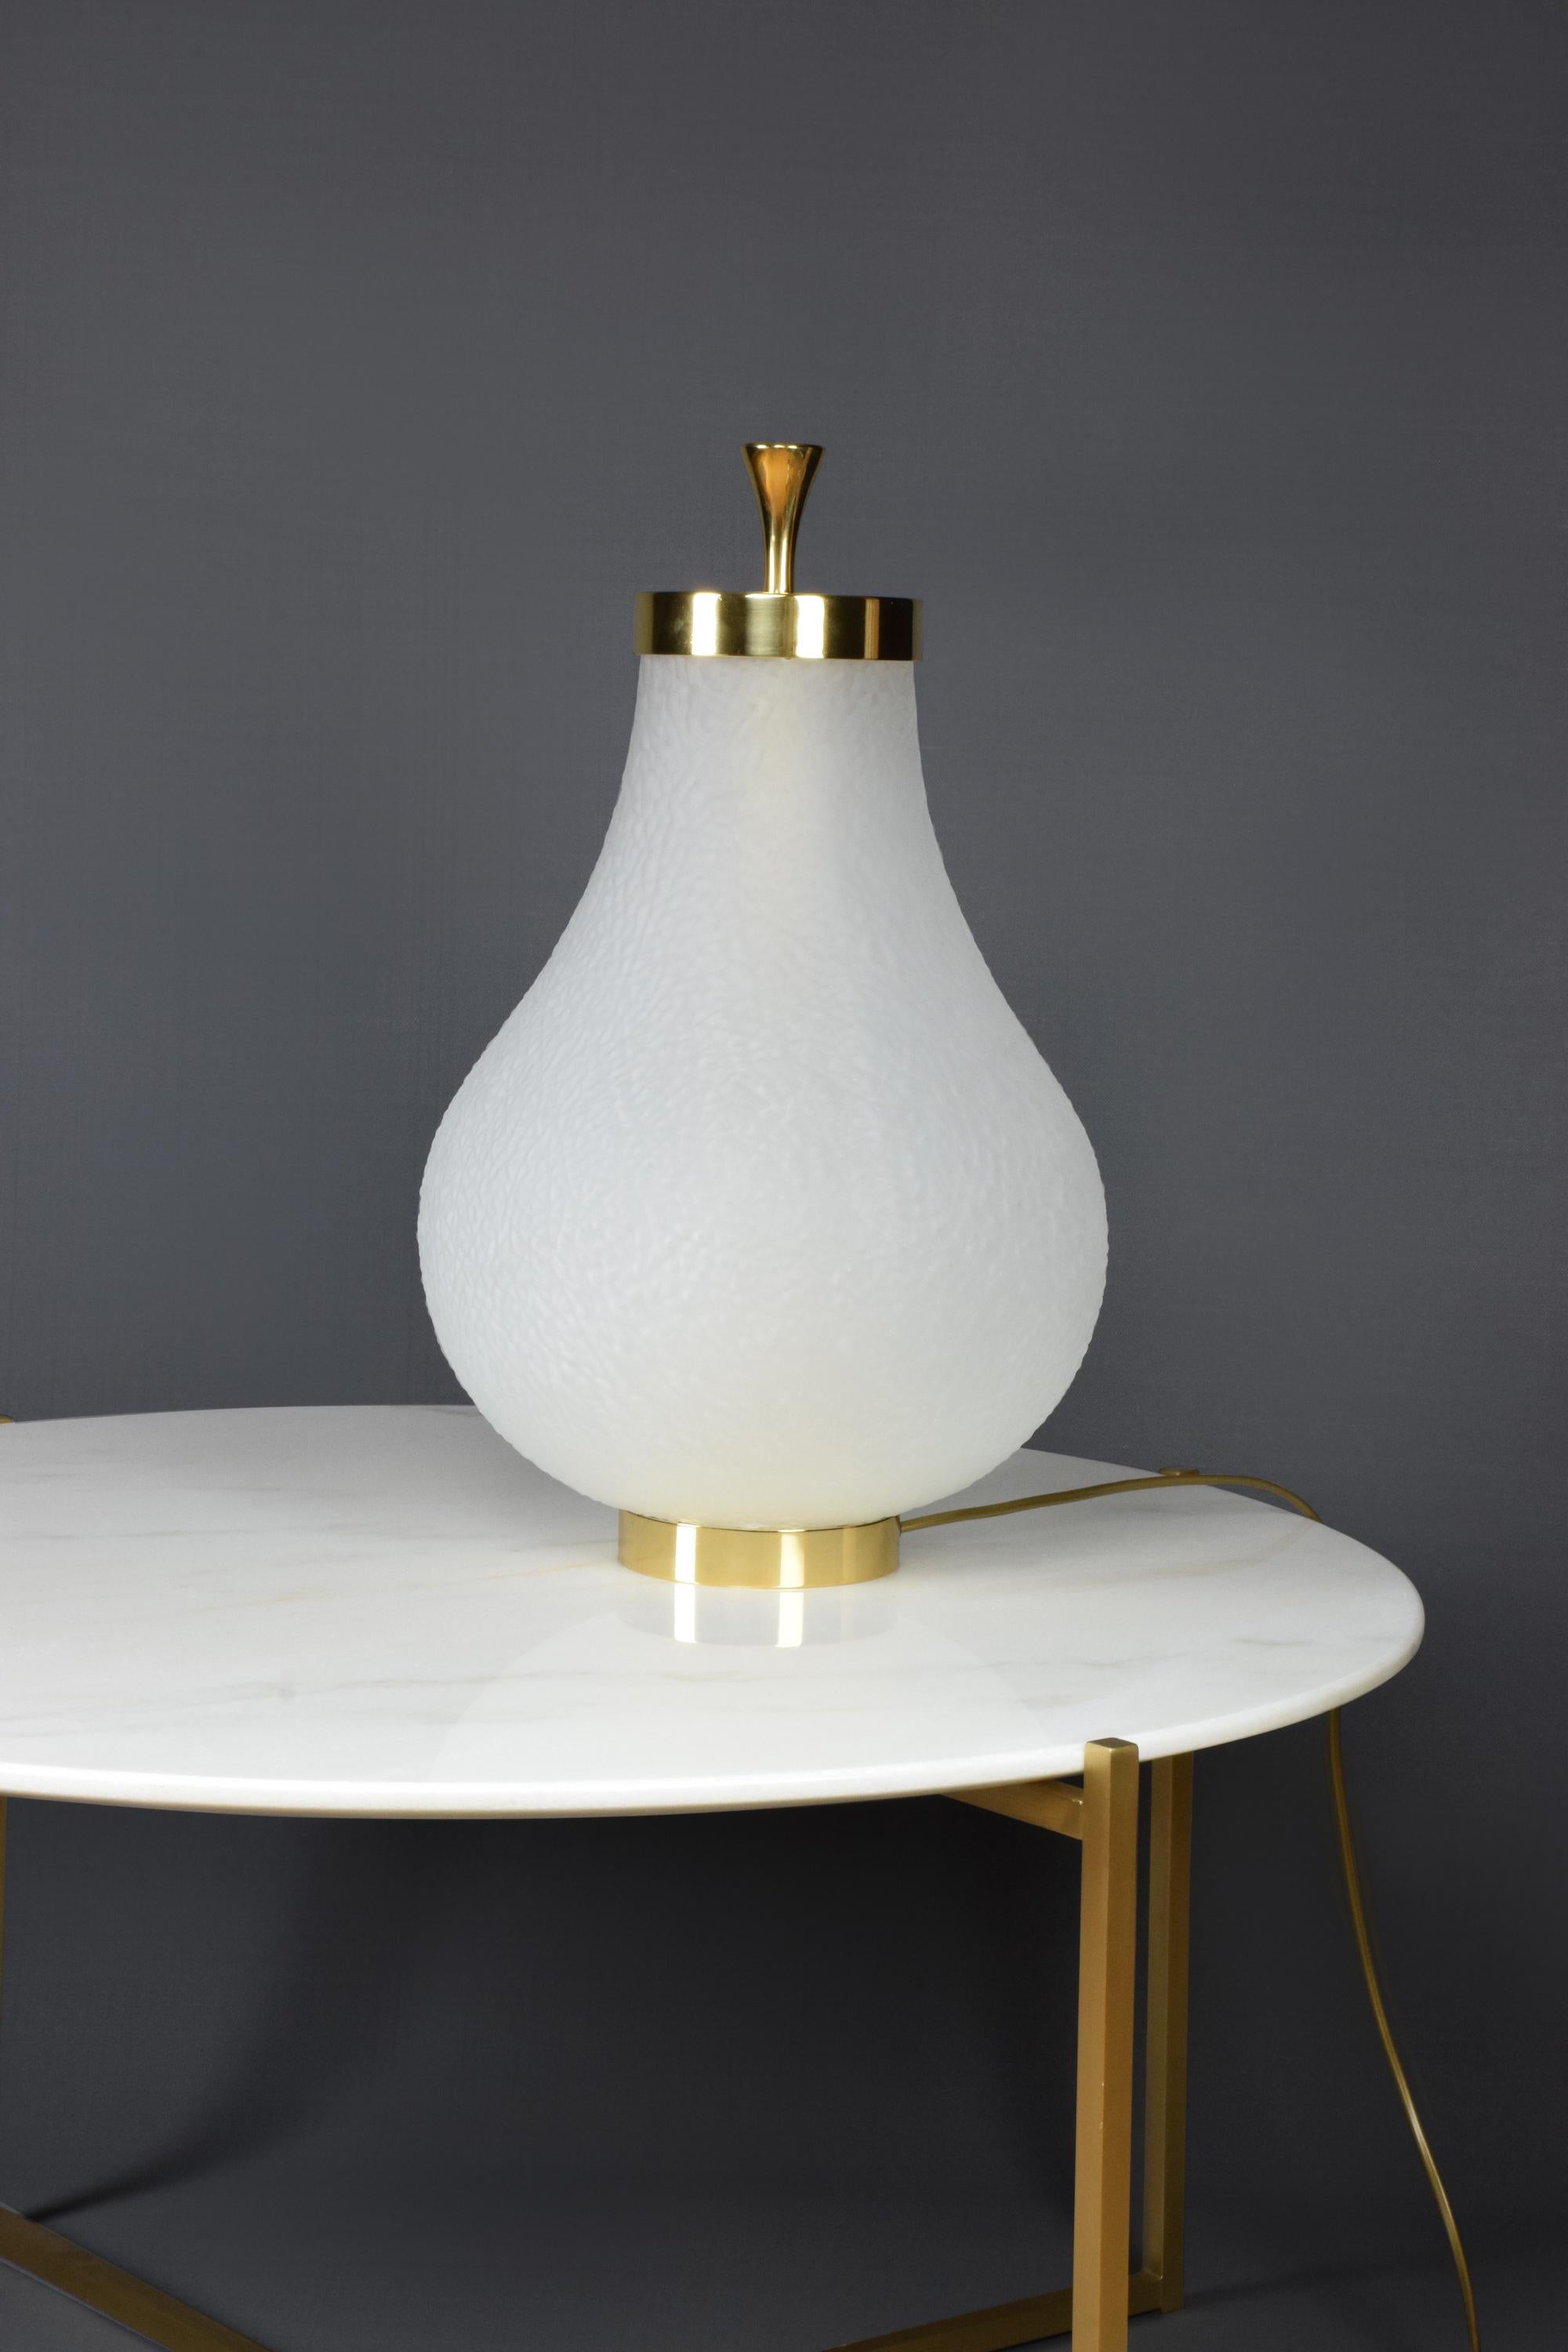 An accent table lamp designed with an organic frosted textured glass shade and brass details which diffuses a warm light all around.
1x60 W max E27
230 V - LED integrated
120 V - LED.

Flow 2 by JA Studio 
The inspiration behind this collection was